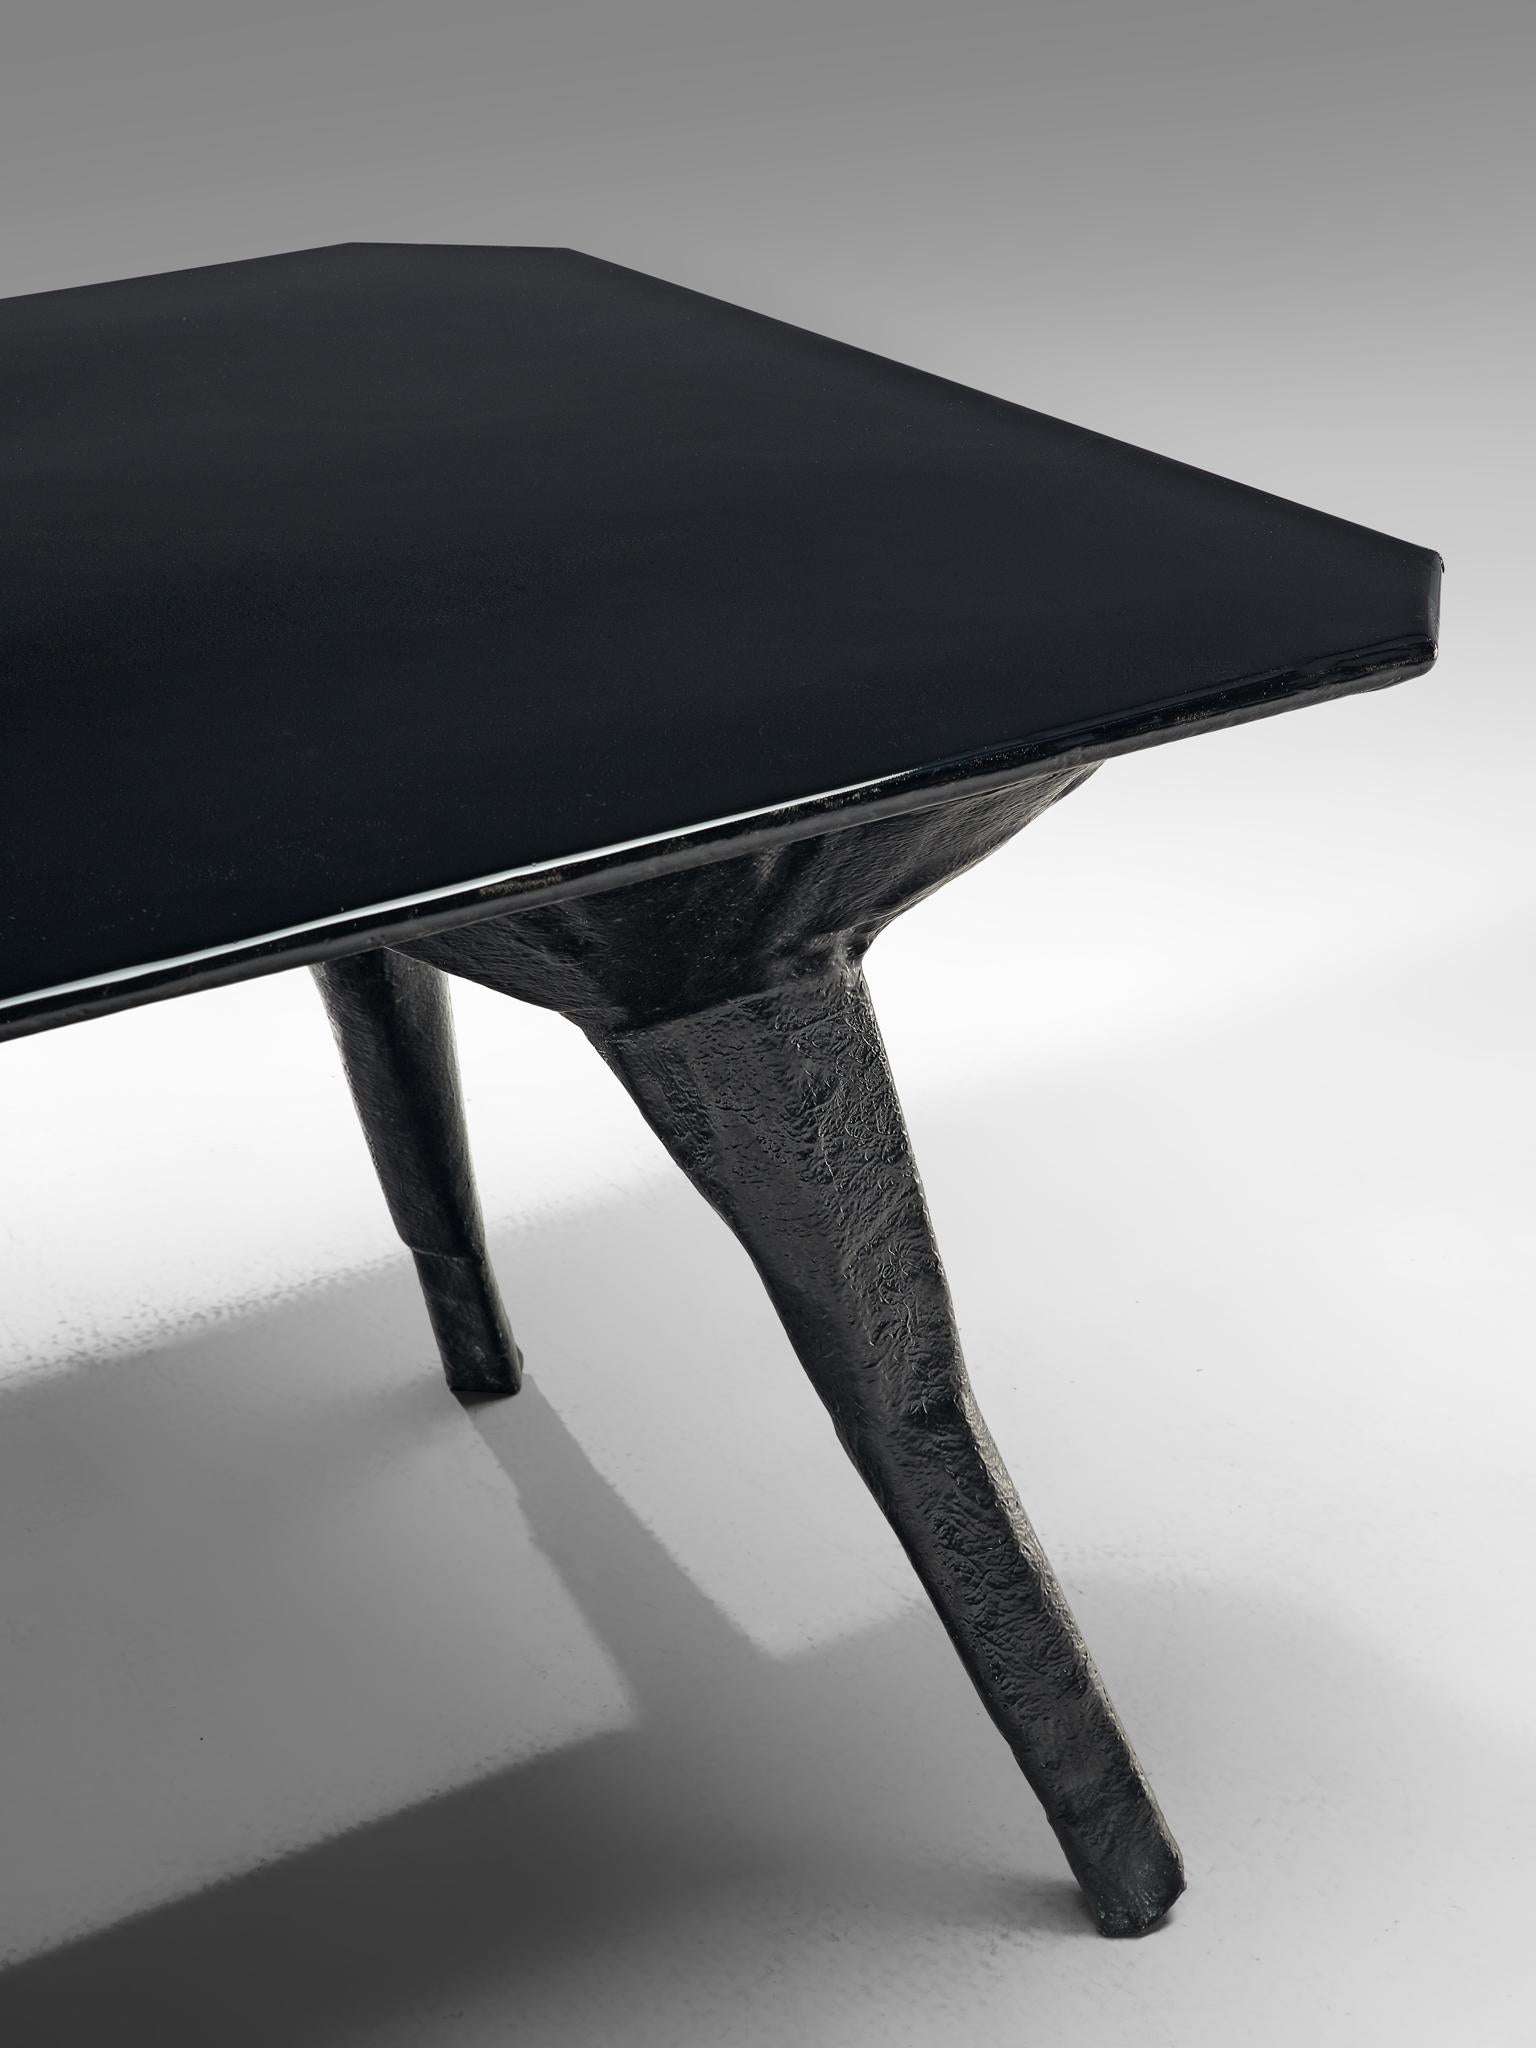 Fiberglass El Ultimo Grito Dining Table with Sculptural Legs